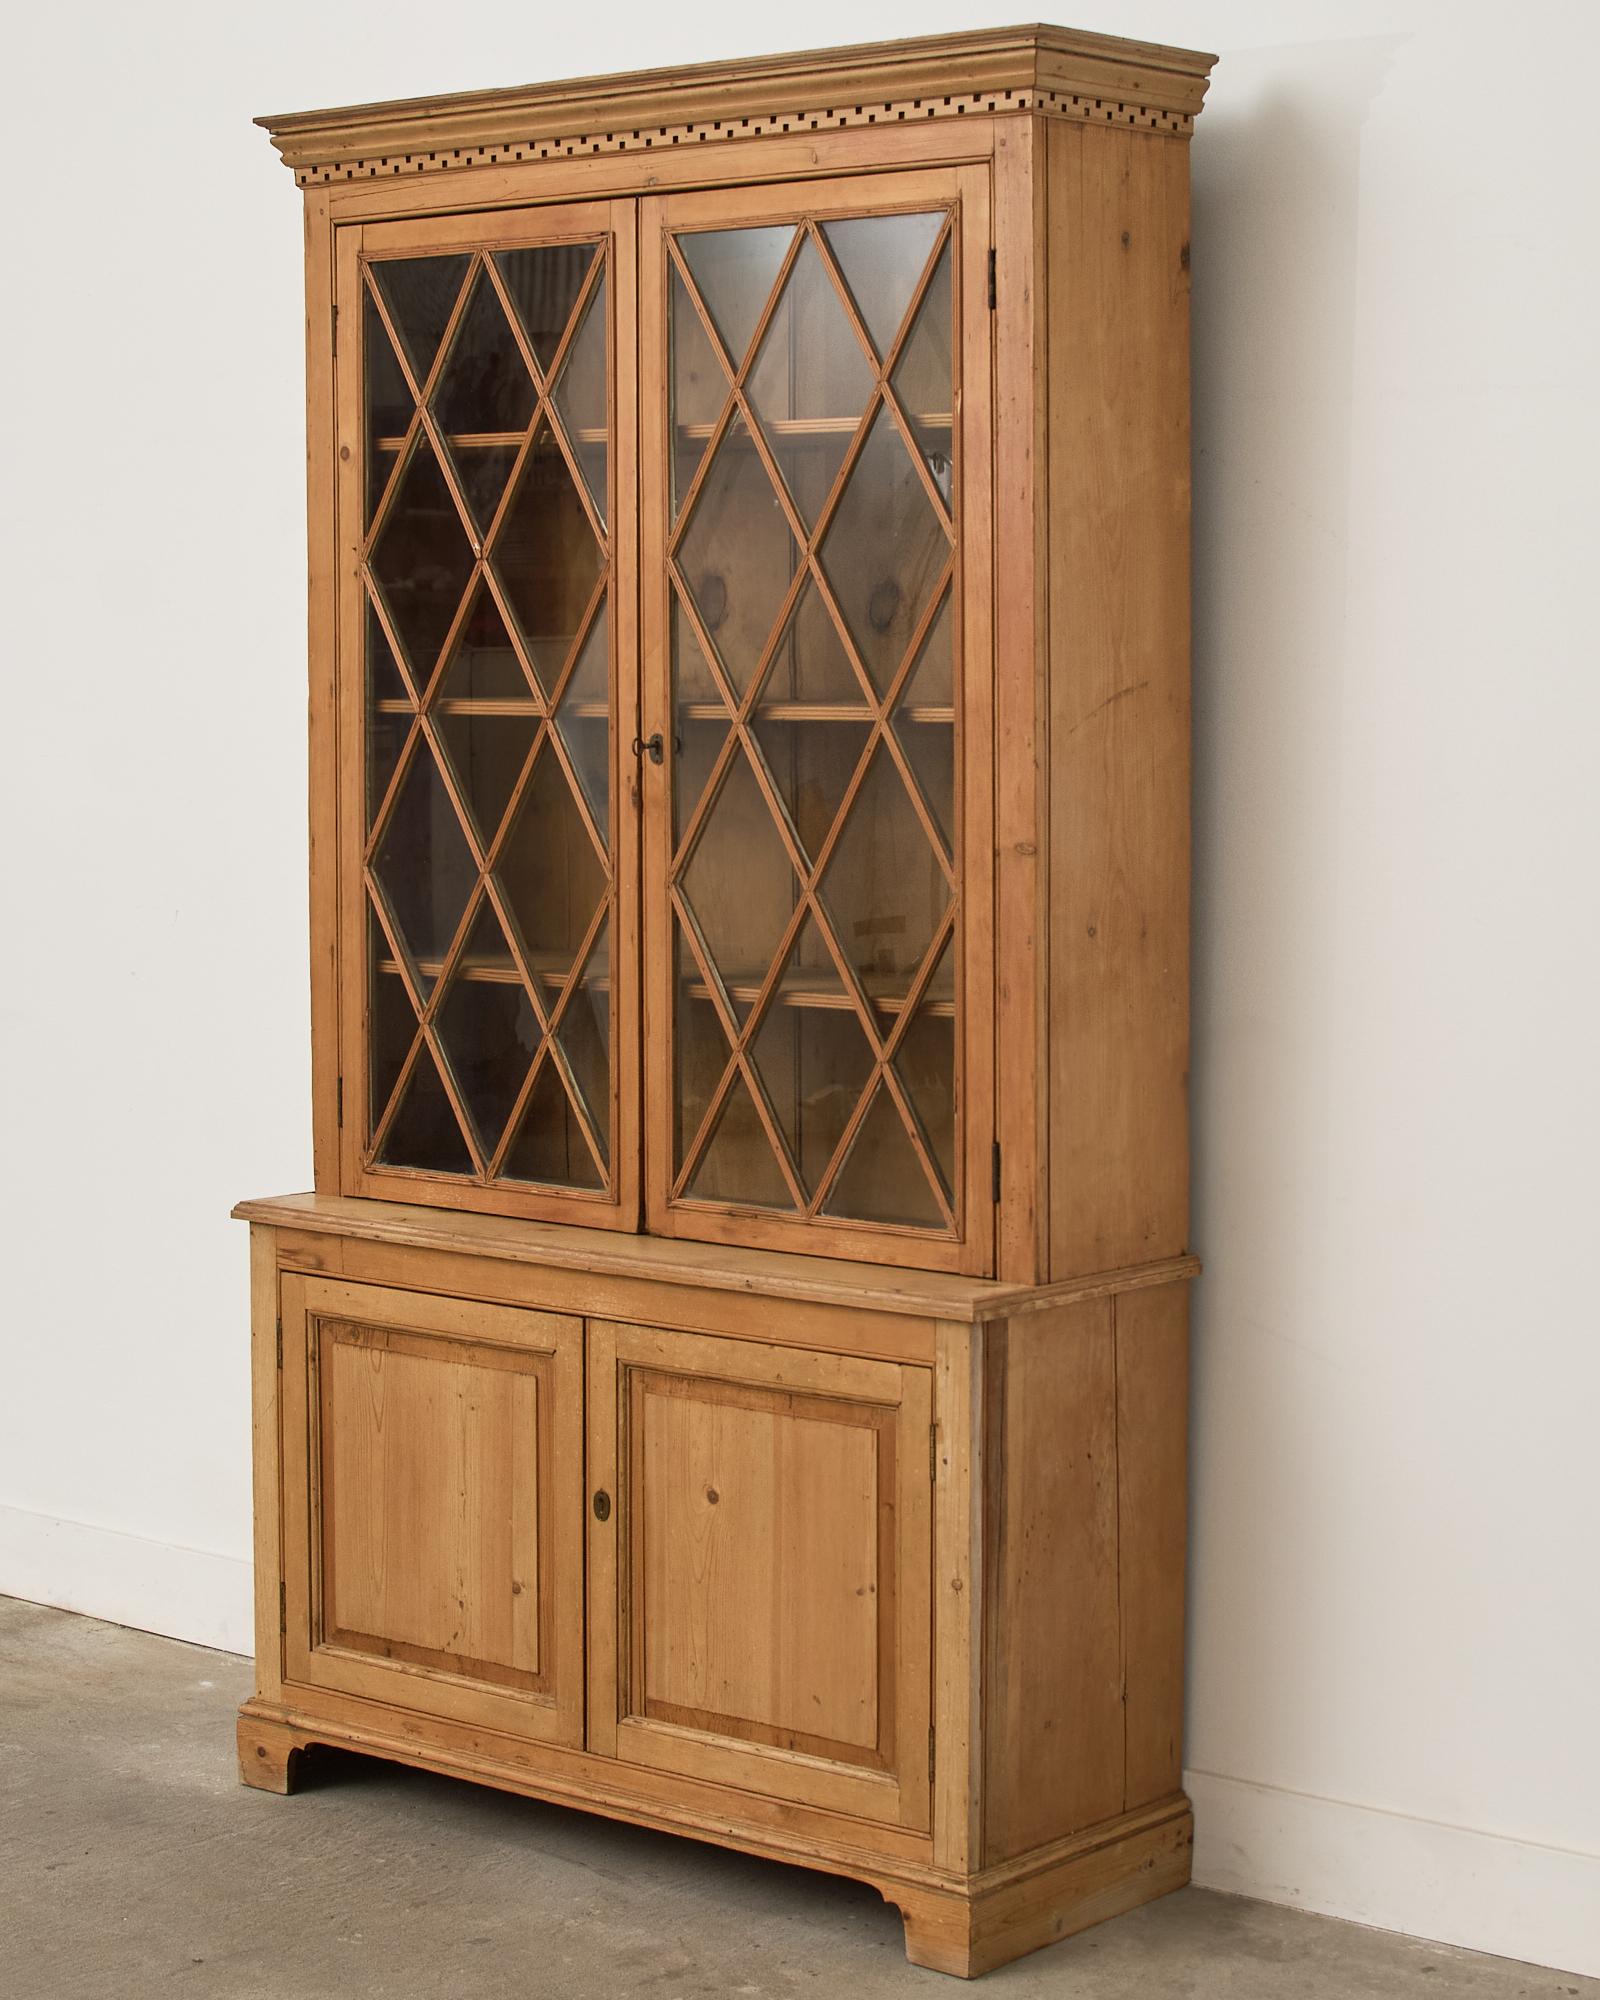 Gorgeous country English bookcase cabinet or cupboard made in the Georgian taste. The two-part cabinet is crafted from pine and has a step back top case. The top features an astragal glazed glass locking doors with a lattice design surmounted by a